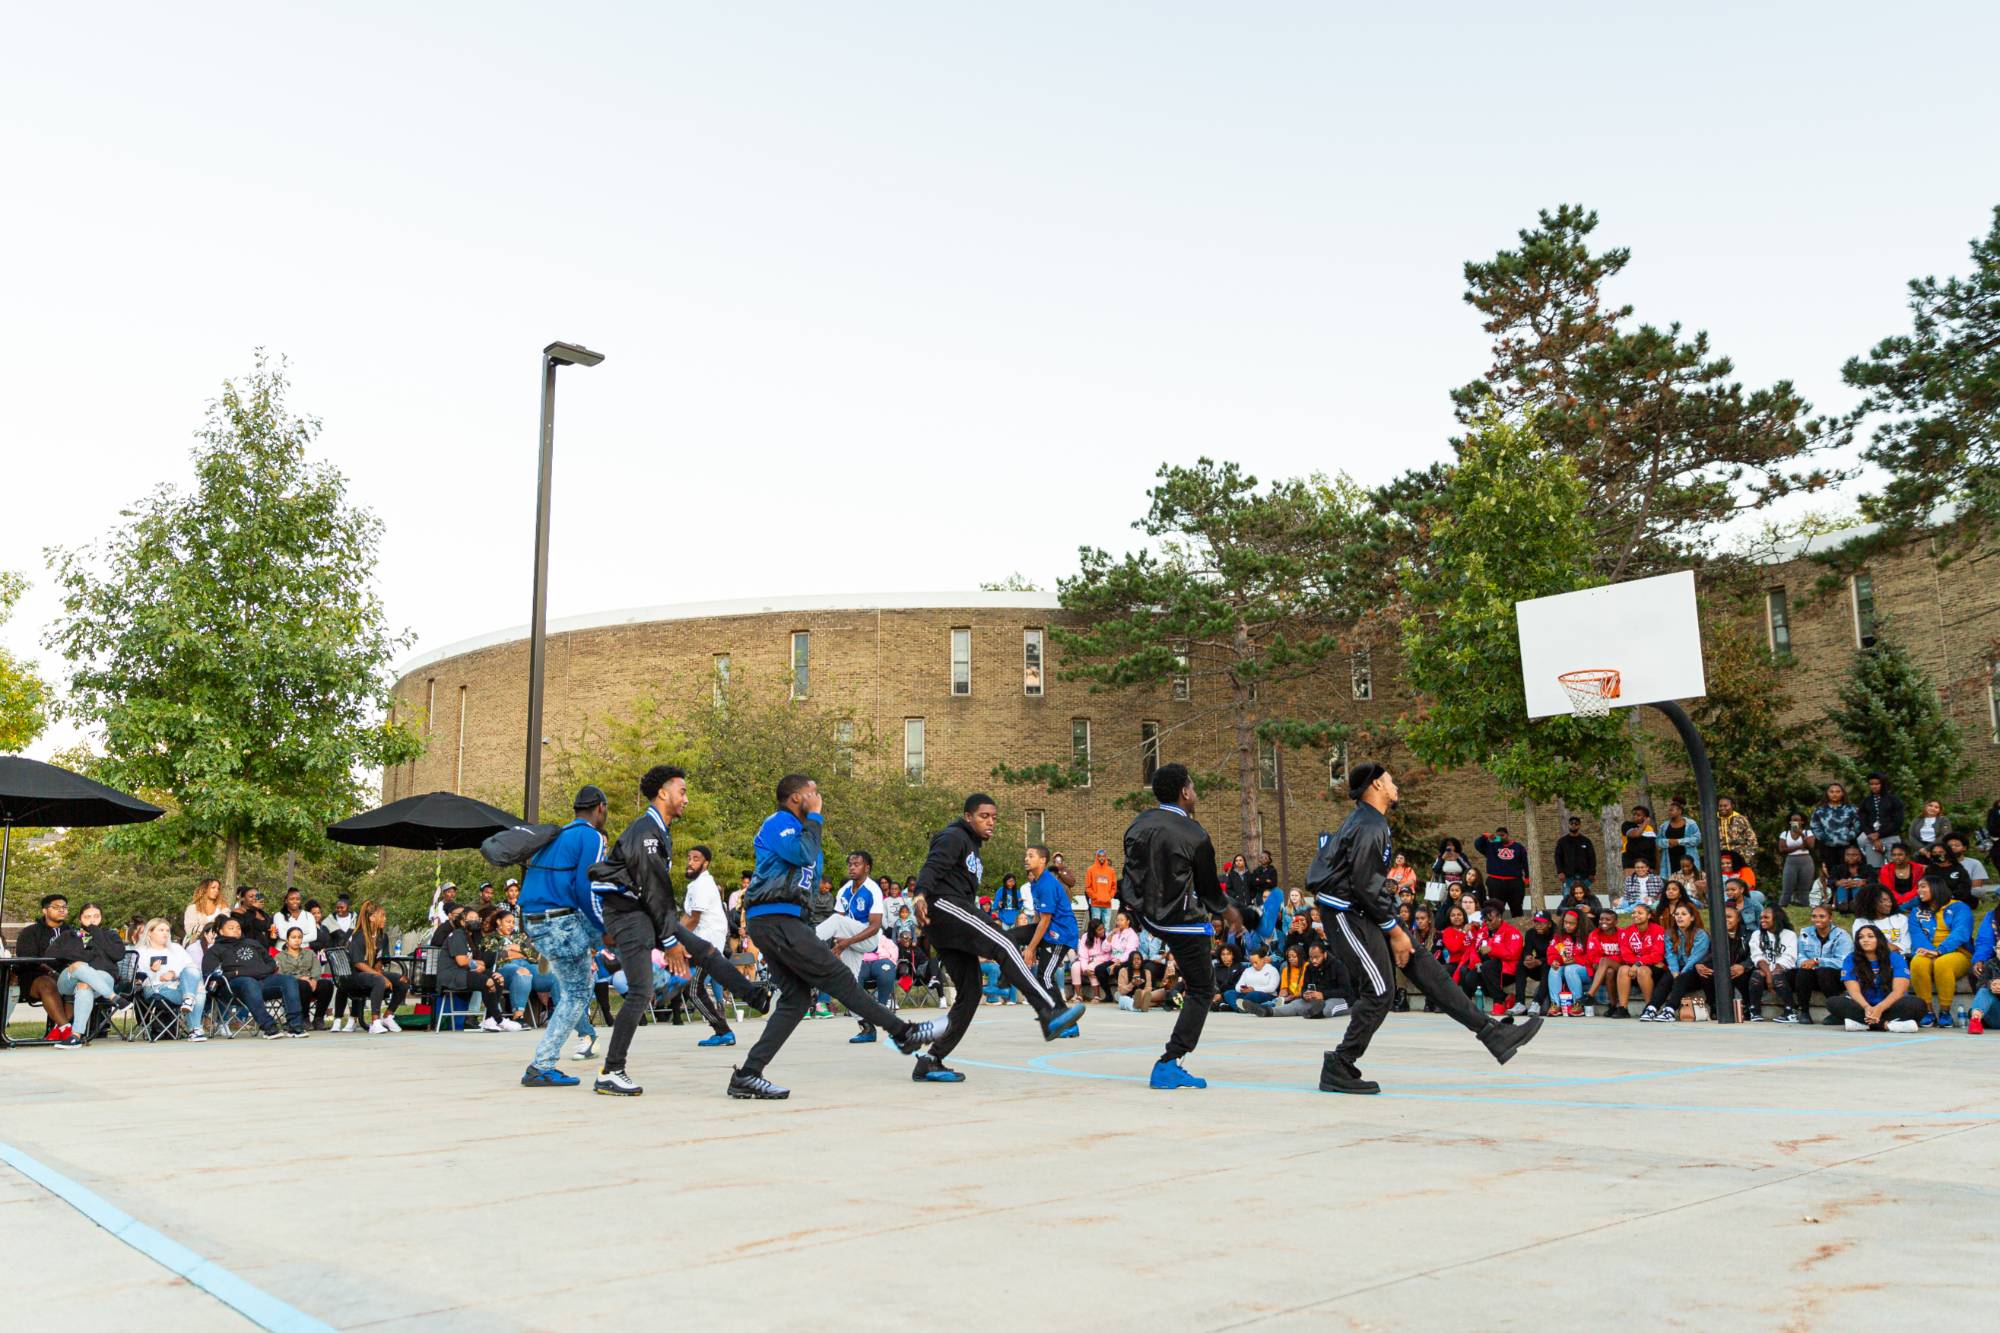 Students participating in the NPHC Yard Show